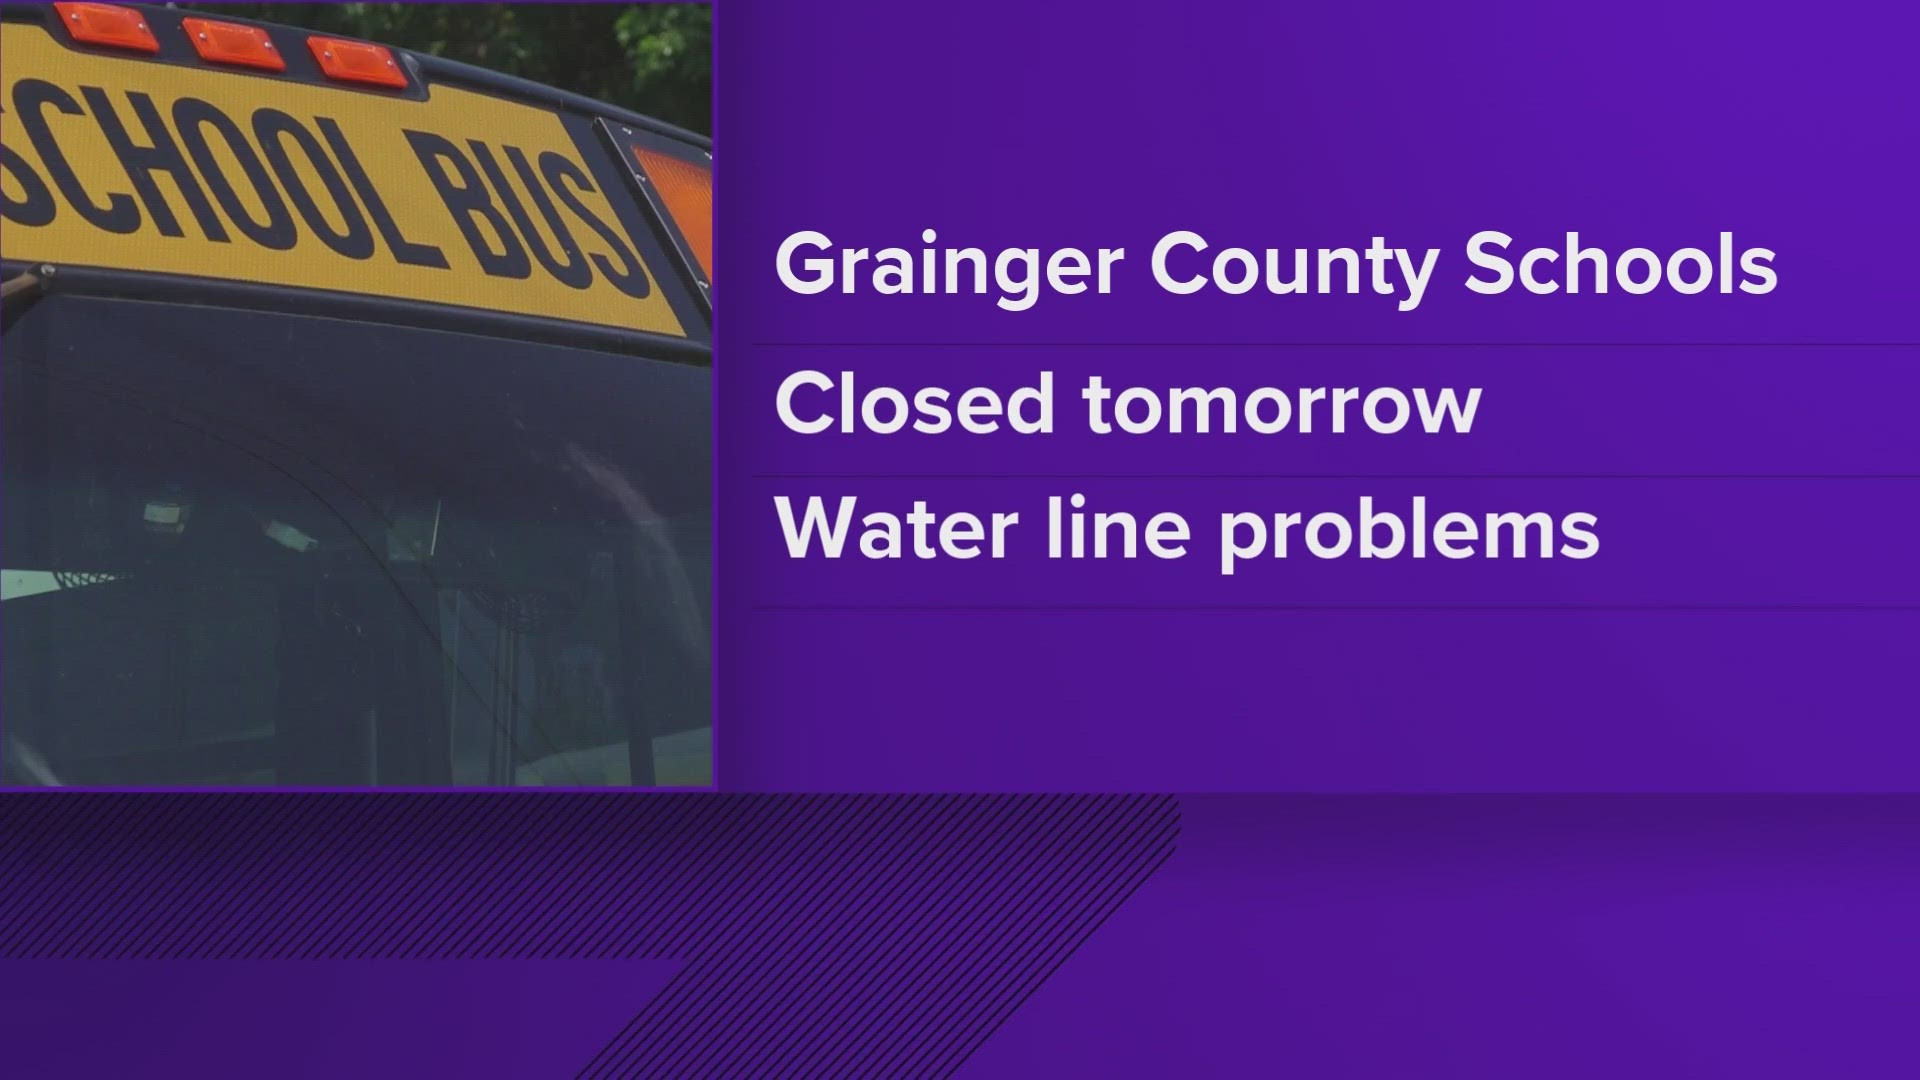 Grainger County Schools posted online that schools will be closed due to water-line problems.